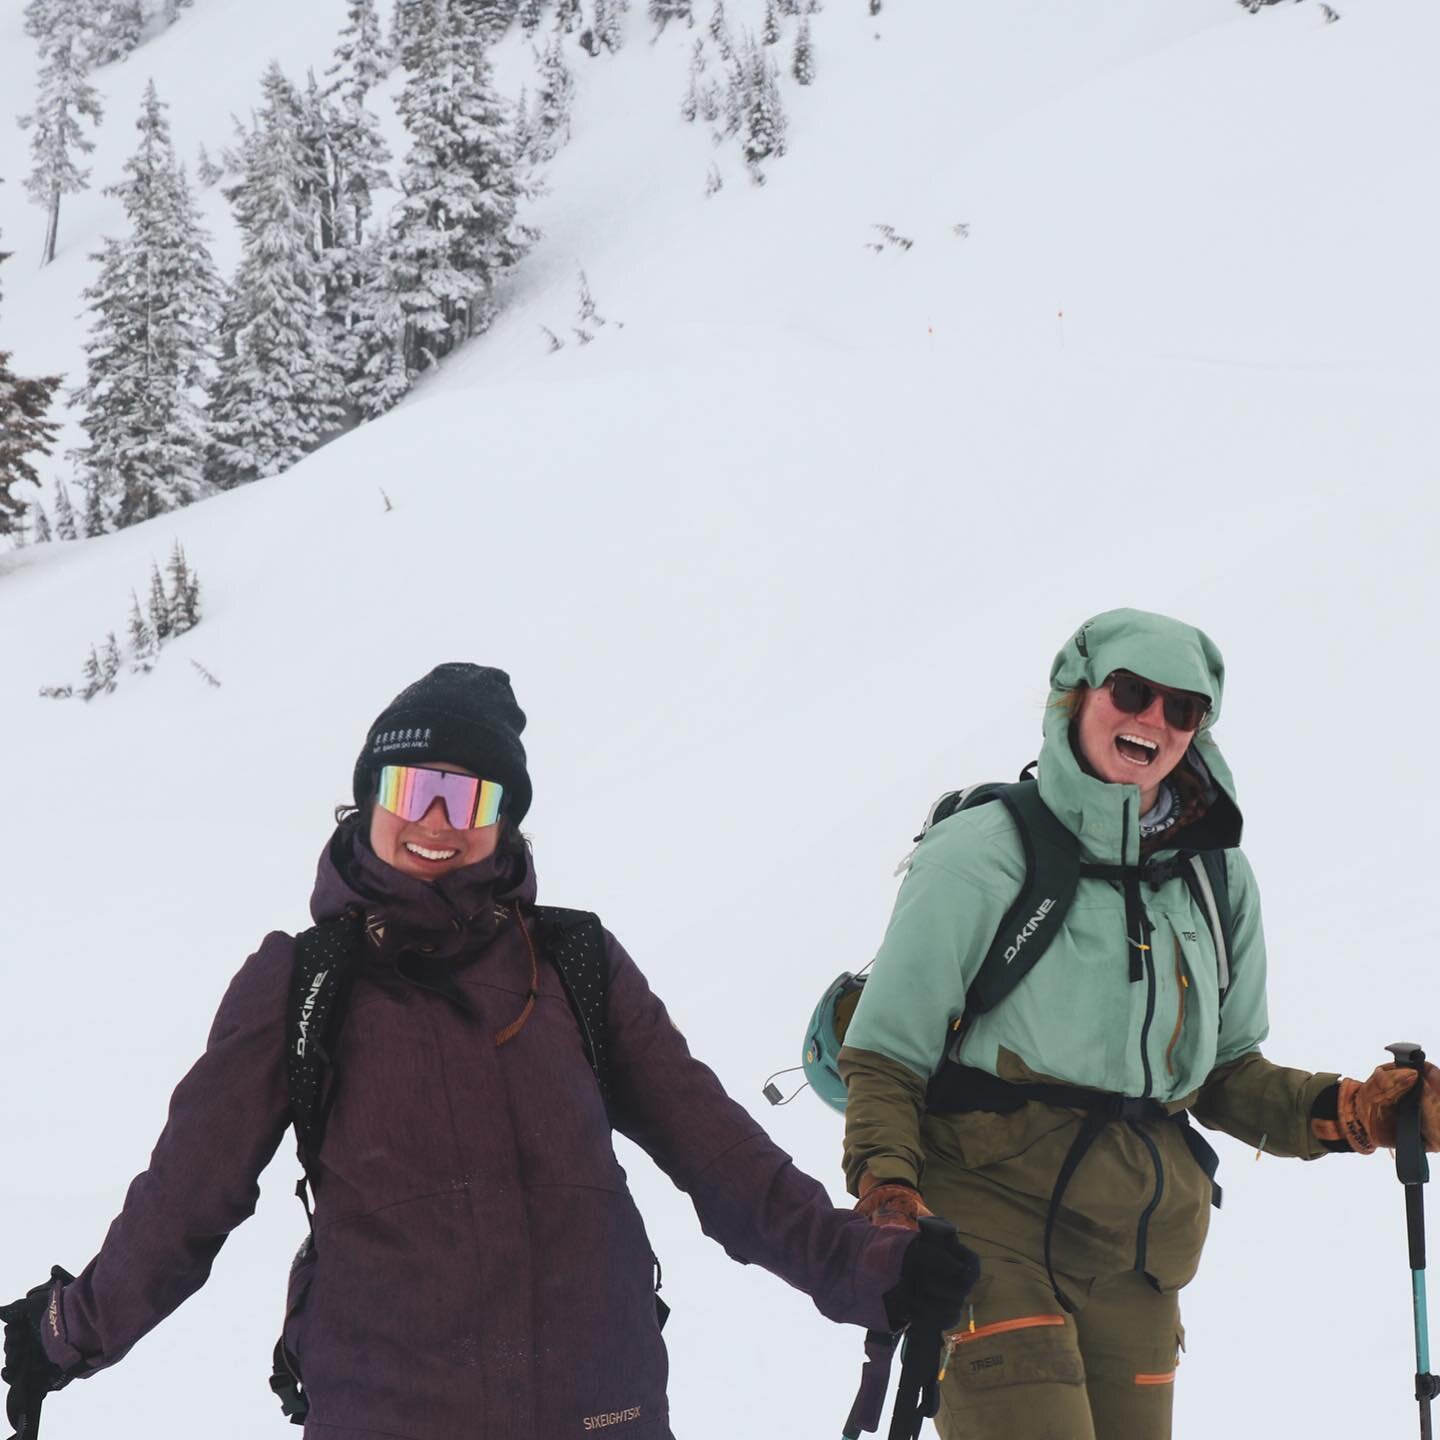 How we&rsquo;re feeling now that it&rsquo;s @bozemansplitfest weekend!! 🙌

Need touring partners? Want to browse all of the coolest splitboard brands in-person and pick up a demo? Feel the need to up your backcountry knowledge? Want a free local bre